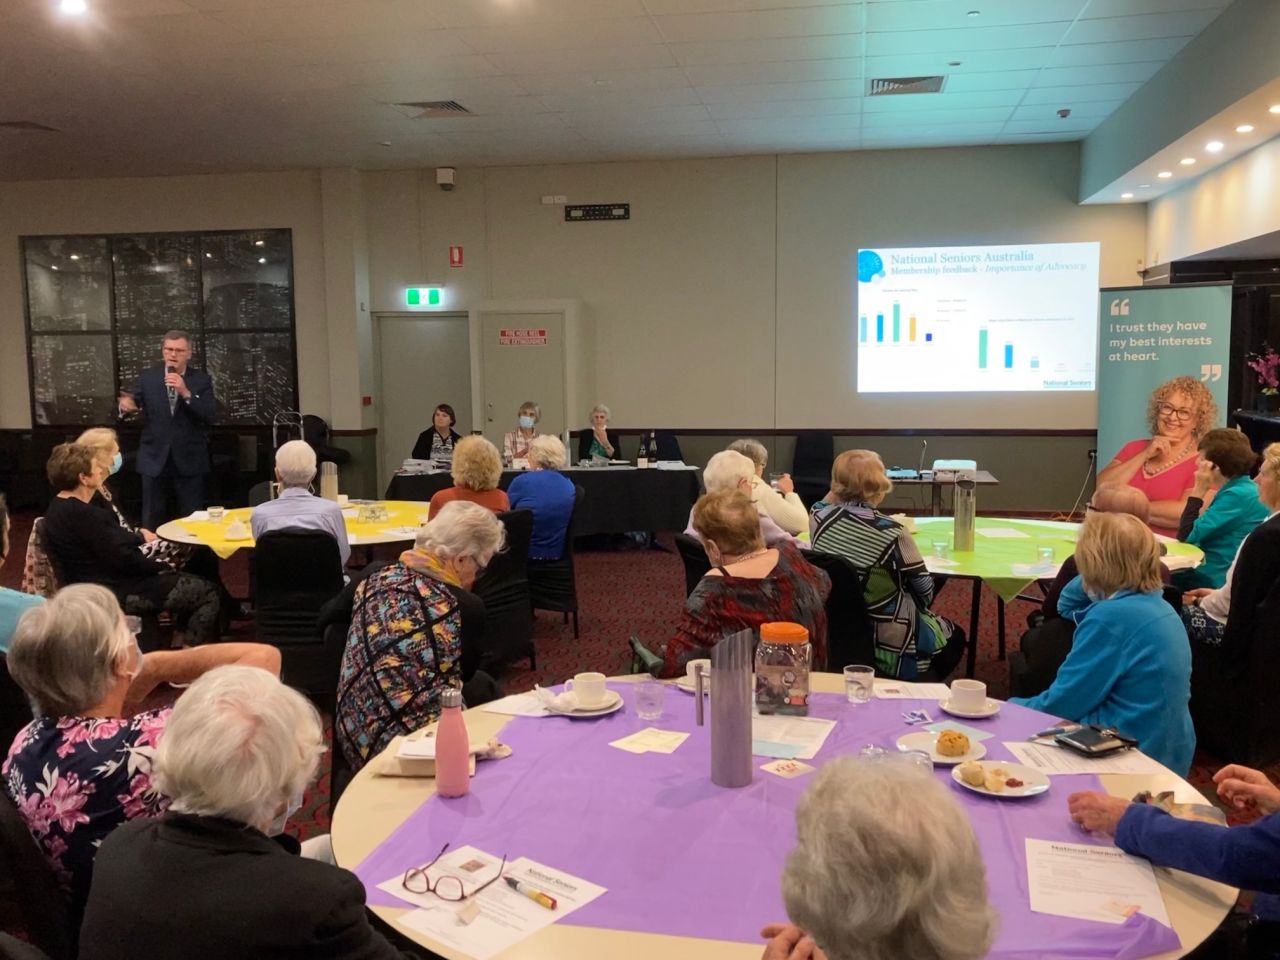 Chris Grice, General Manager, National Seniors Australia - guest speaker at August 2021 Coorparoo Branch Meeting